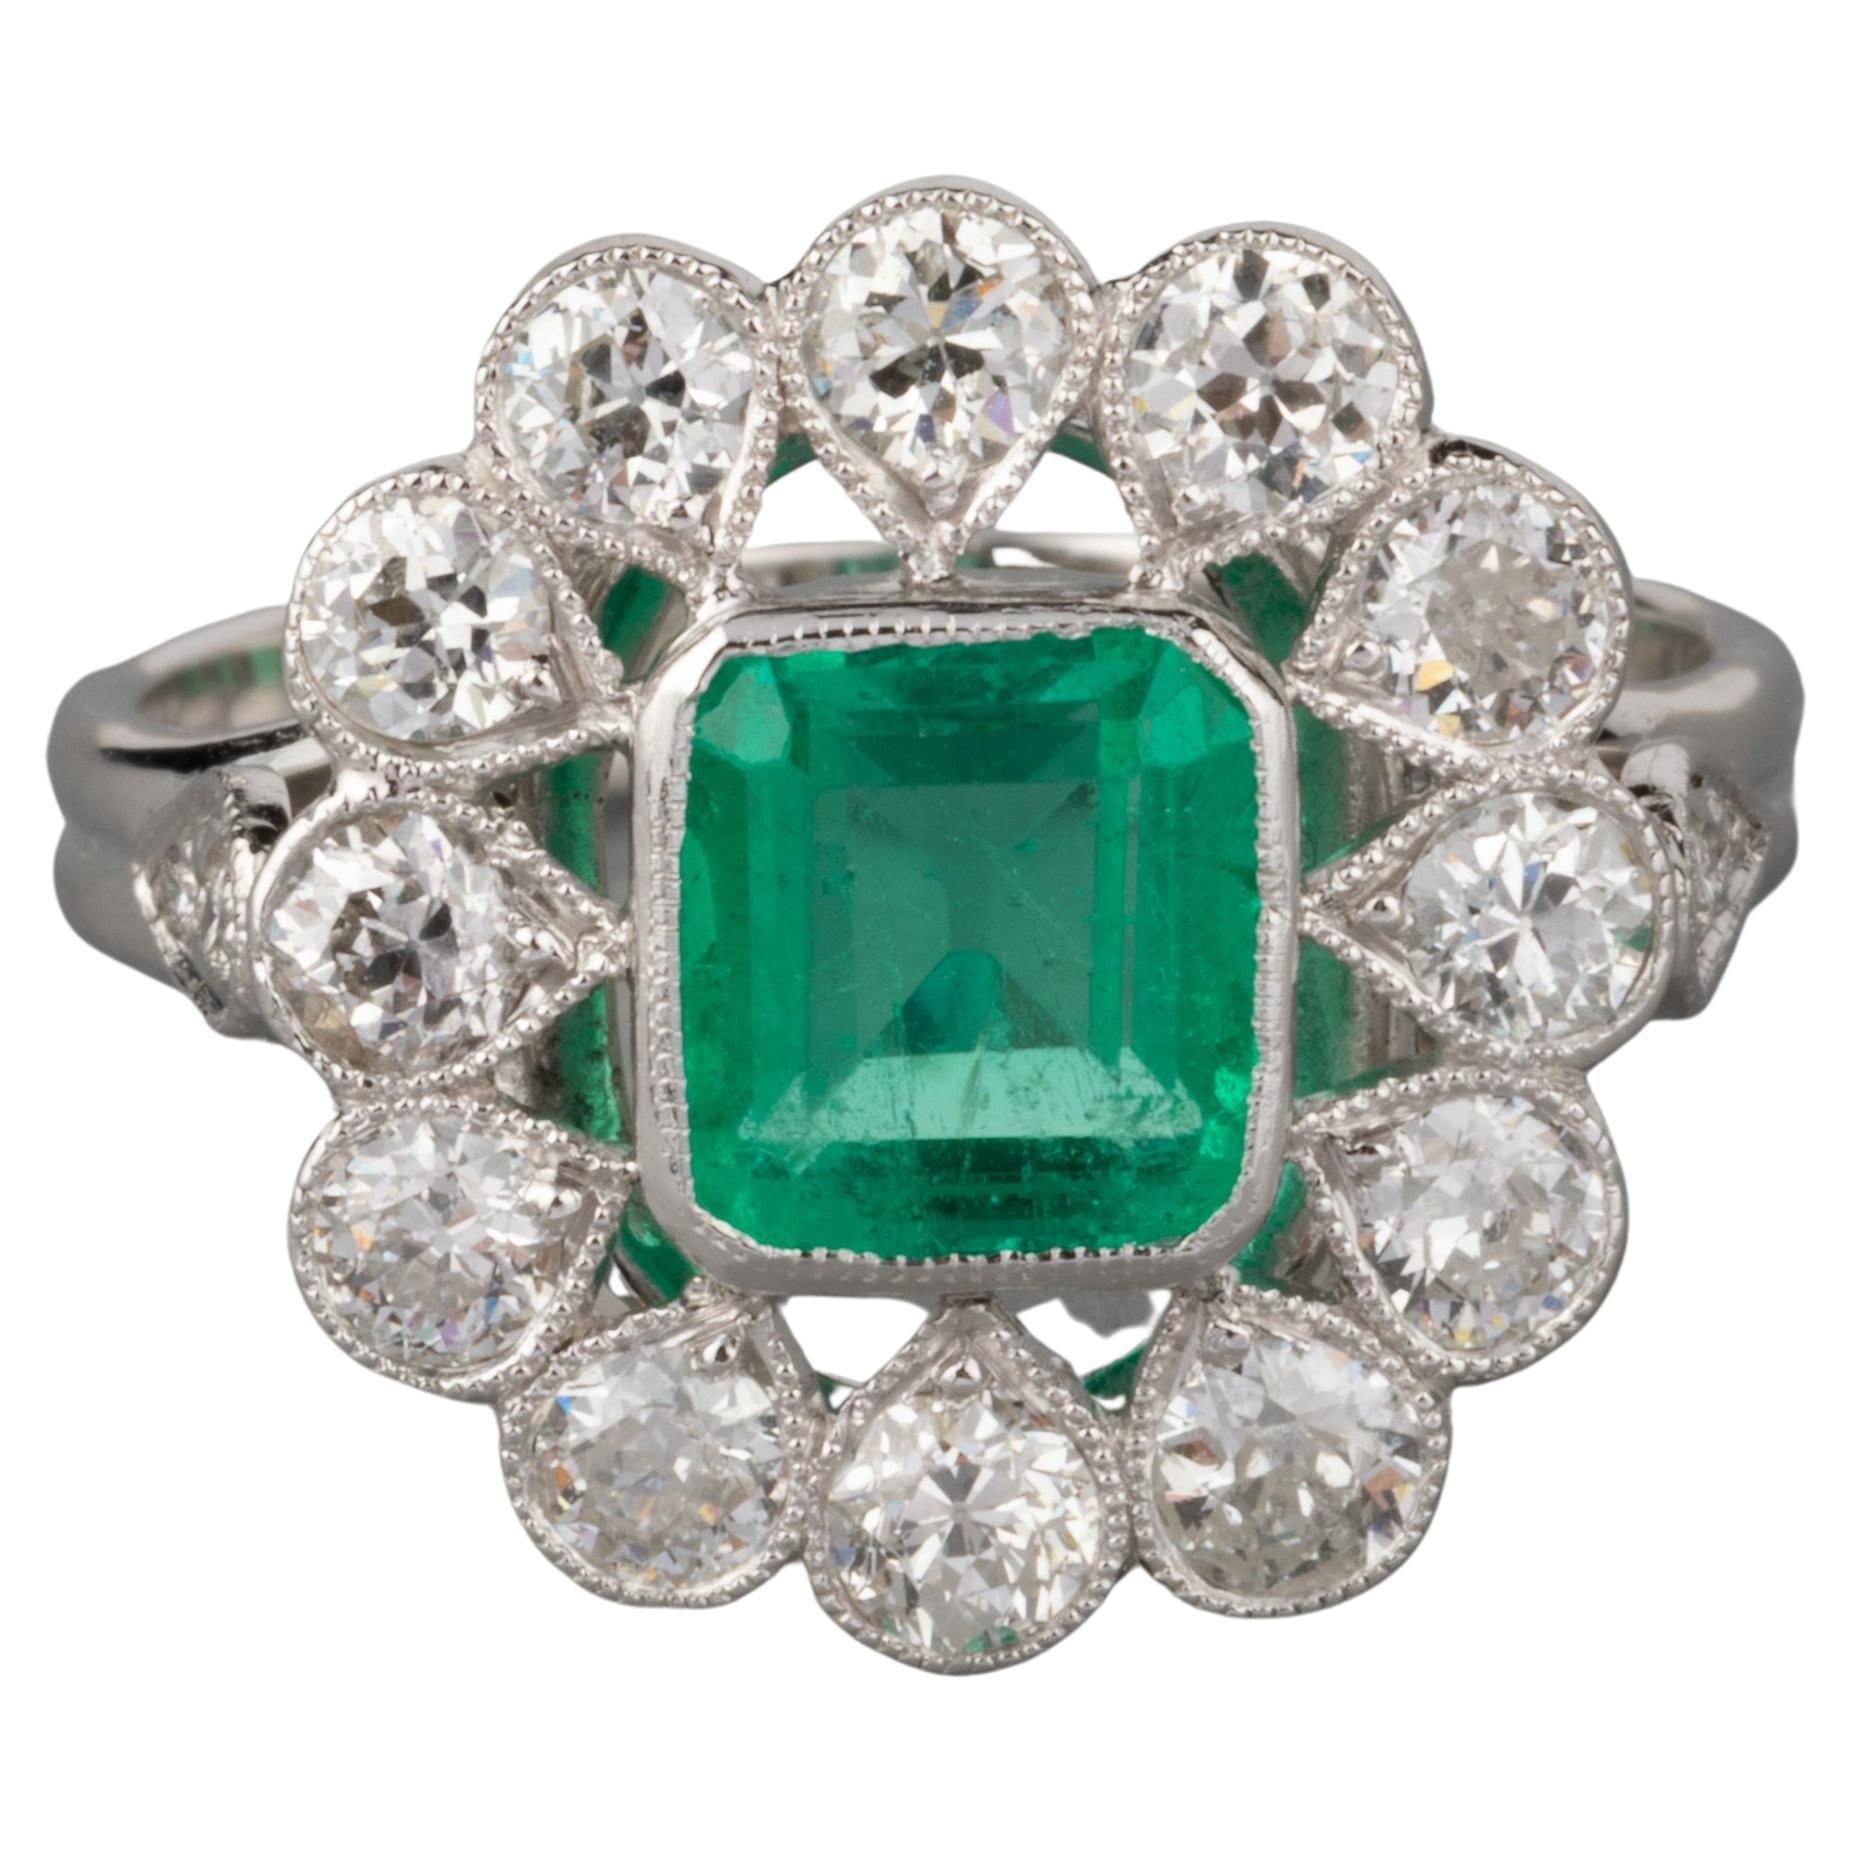 Emerald and Diamonds French Antique Ring